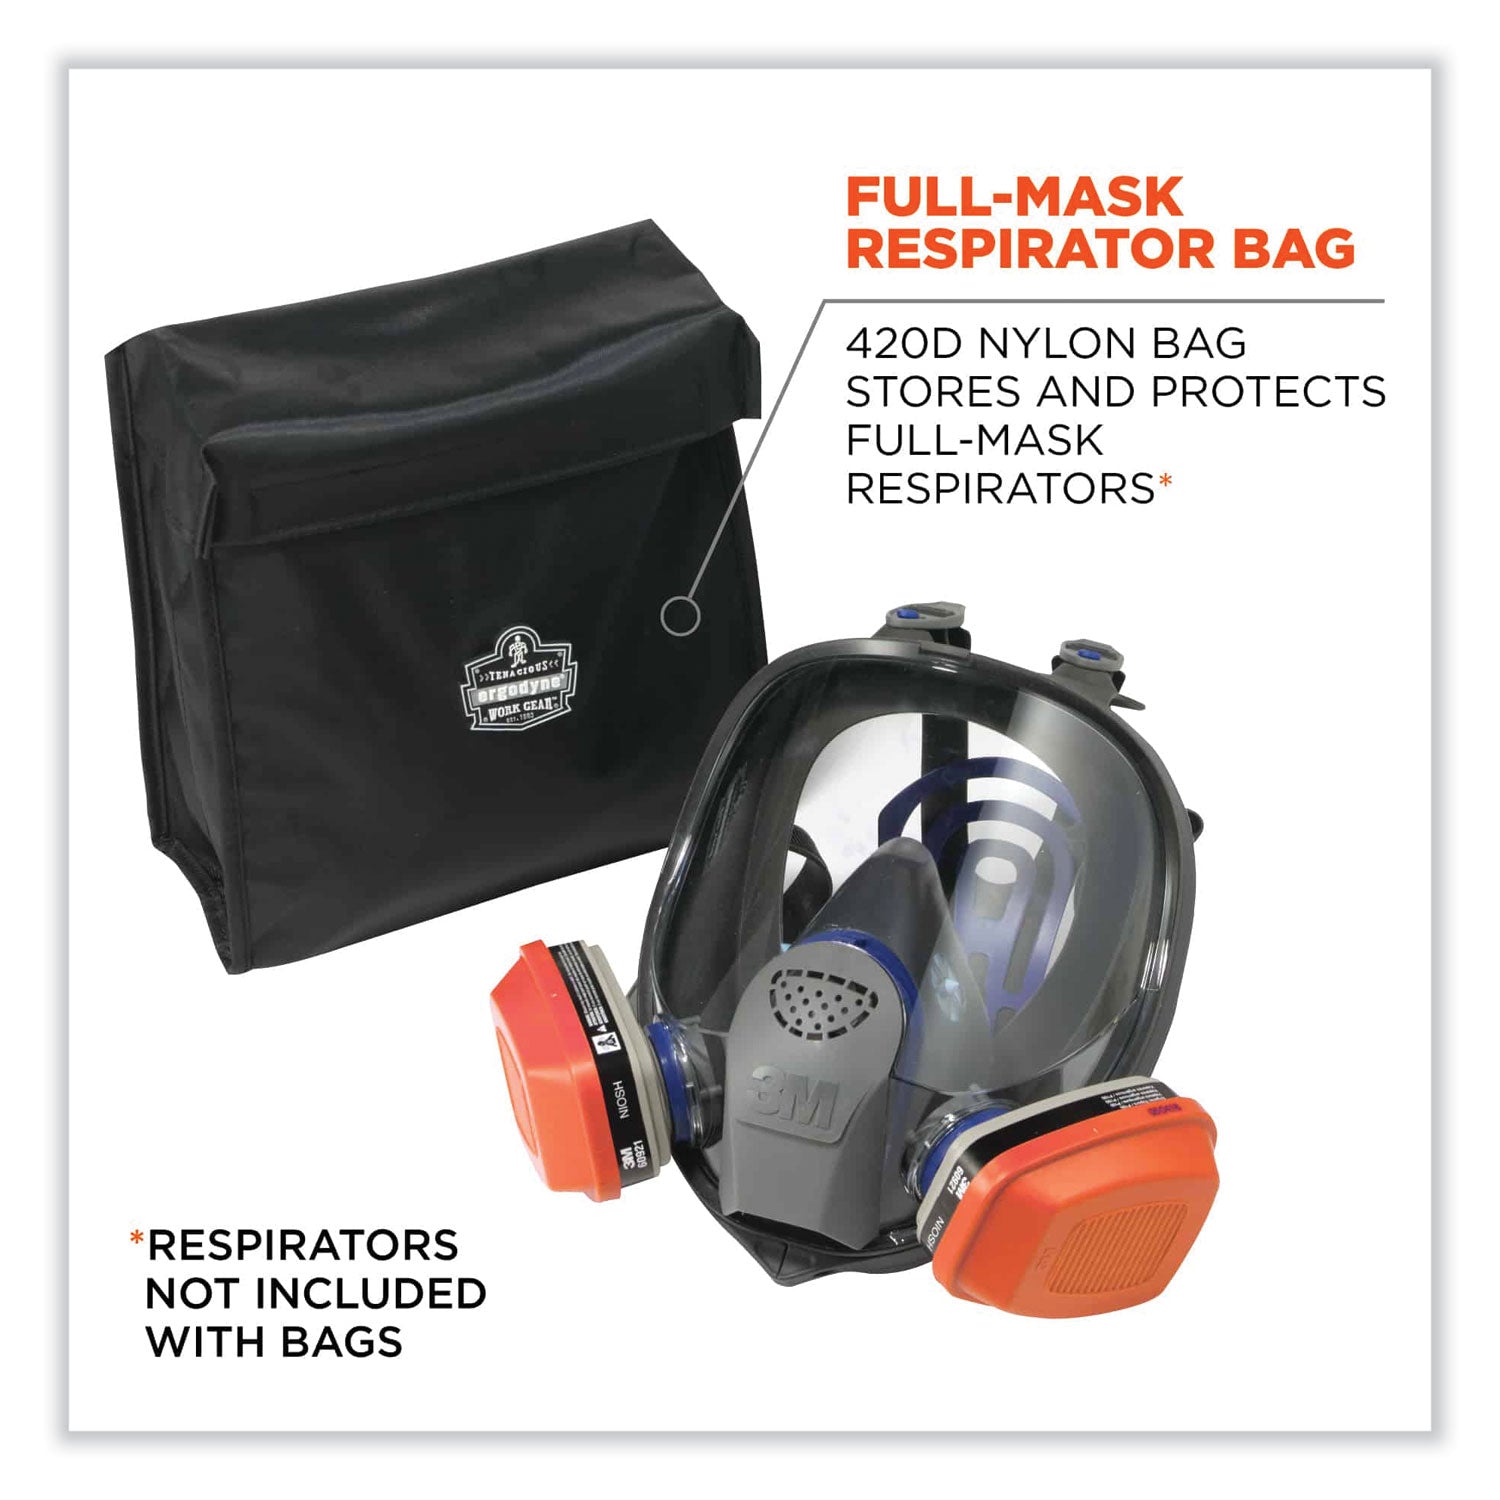 arsenal-5183-full-mask-respirator-bag-with-hook-and-loop-closure-95-x-4-x-12-black-ships-in-1-3-business-days_ego13183 - 2